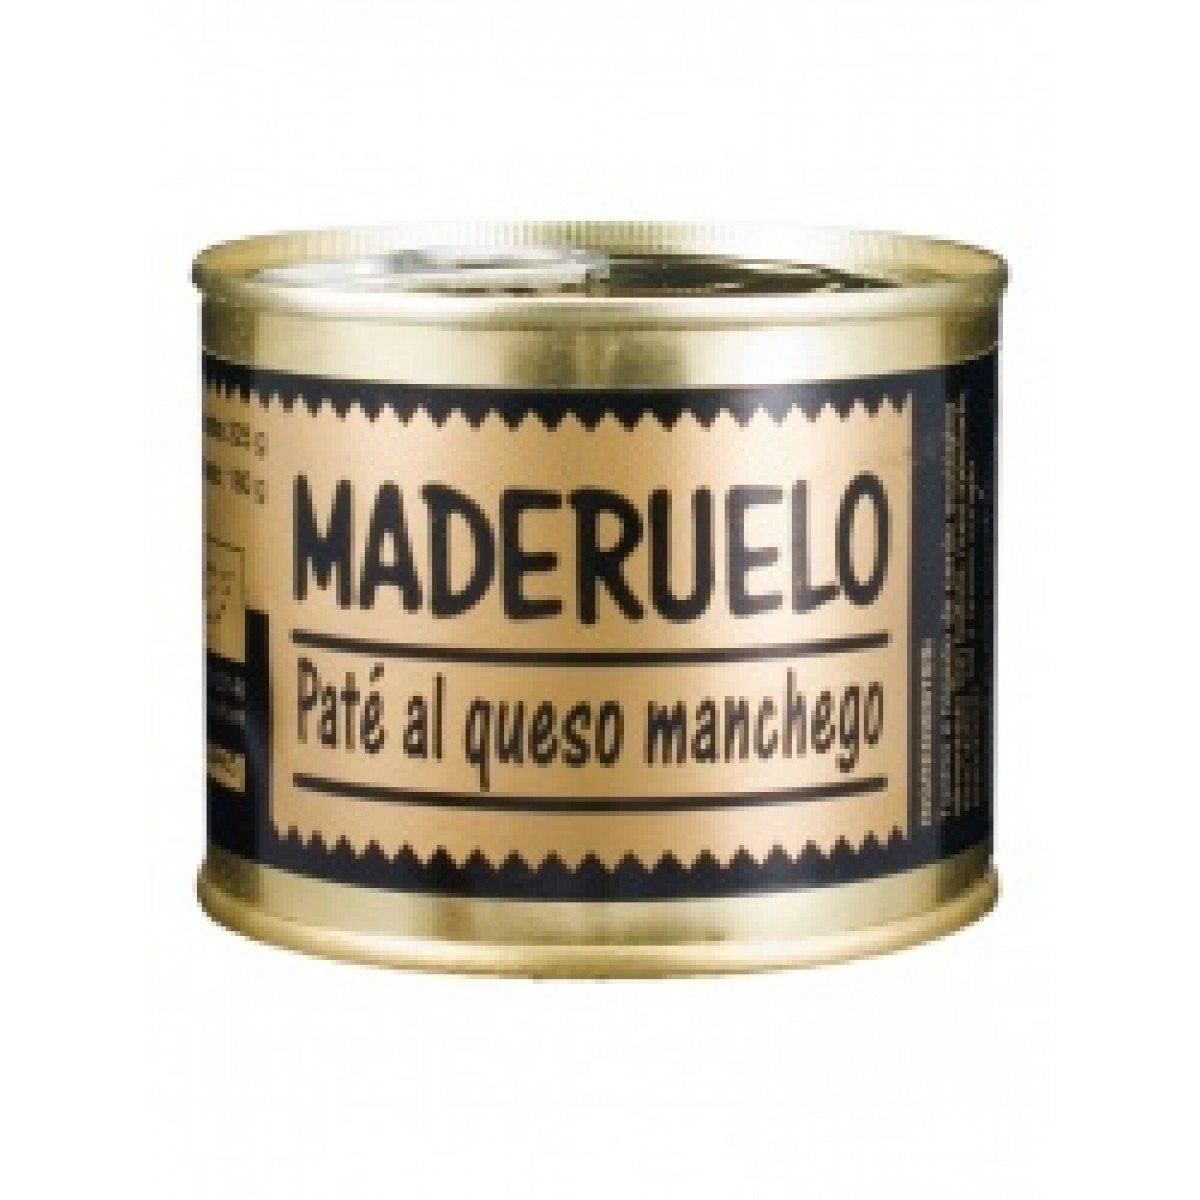 /ficheros/productos/pate queso manchego luis gil.jpg